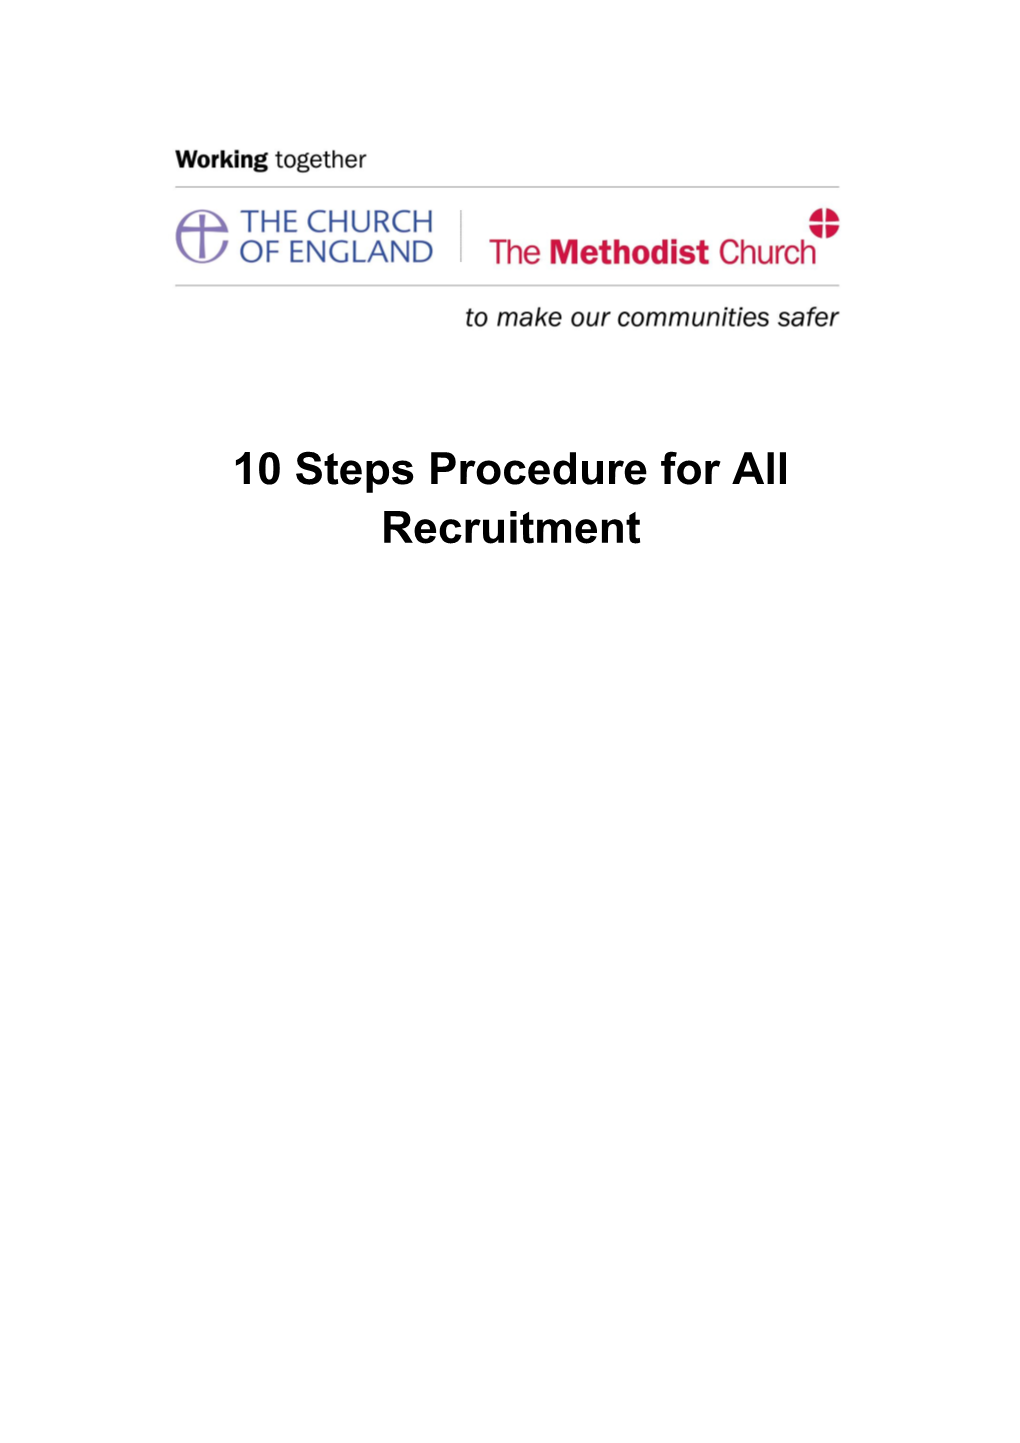 10 Steps Procedure for All Recruitment